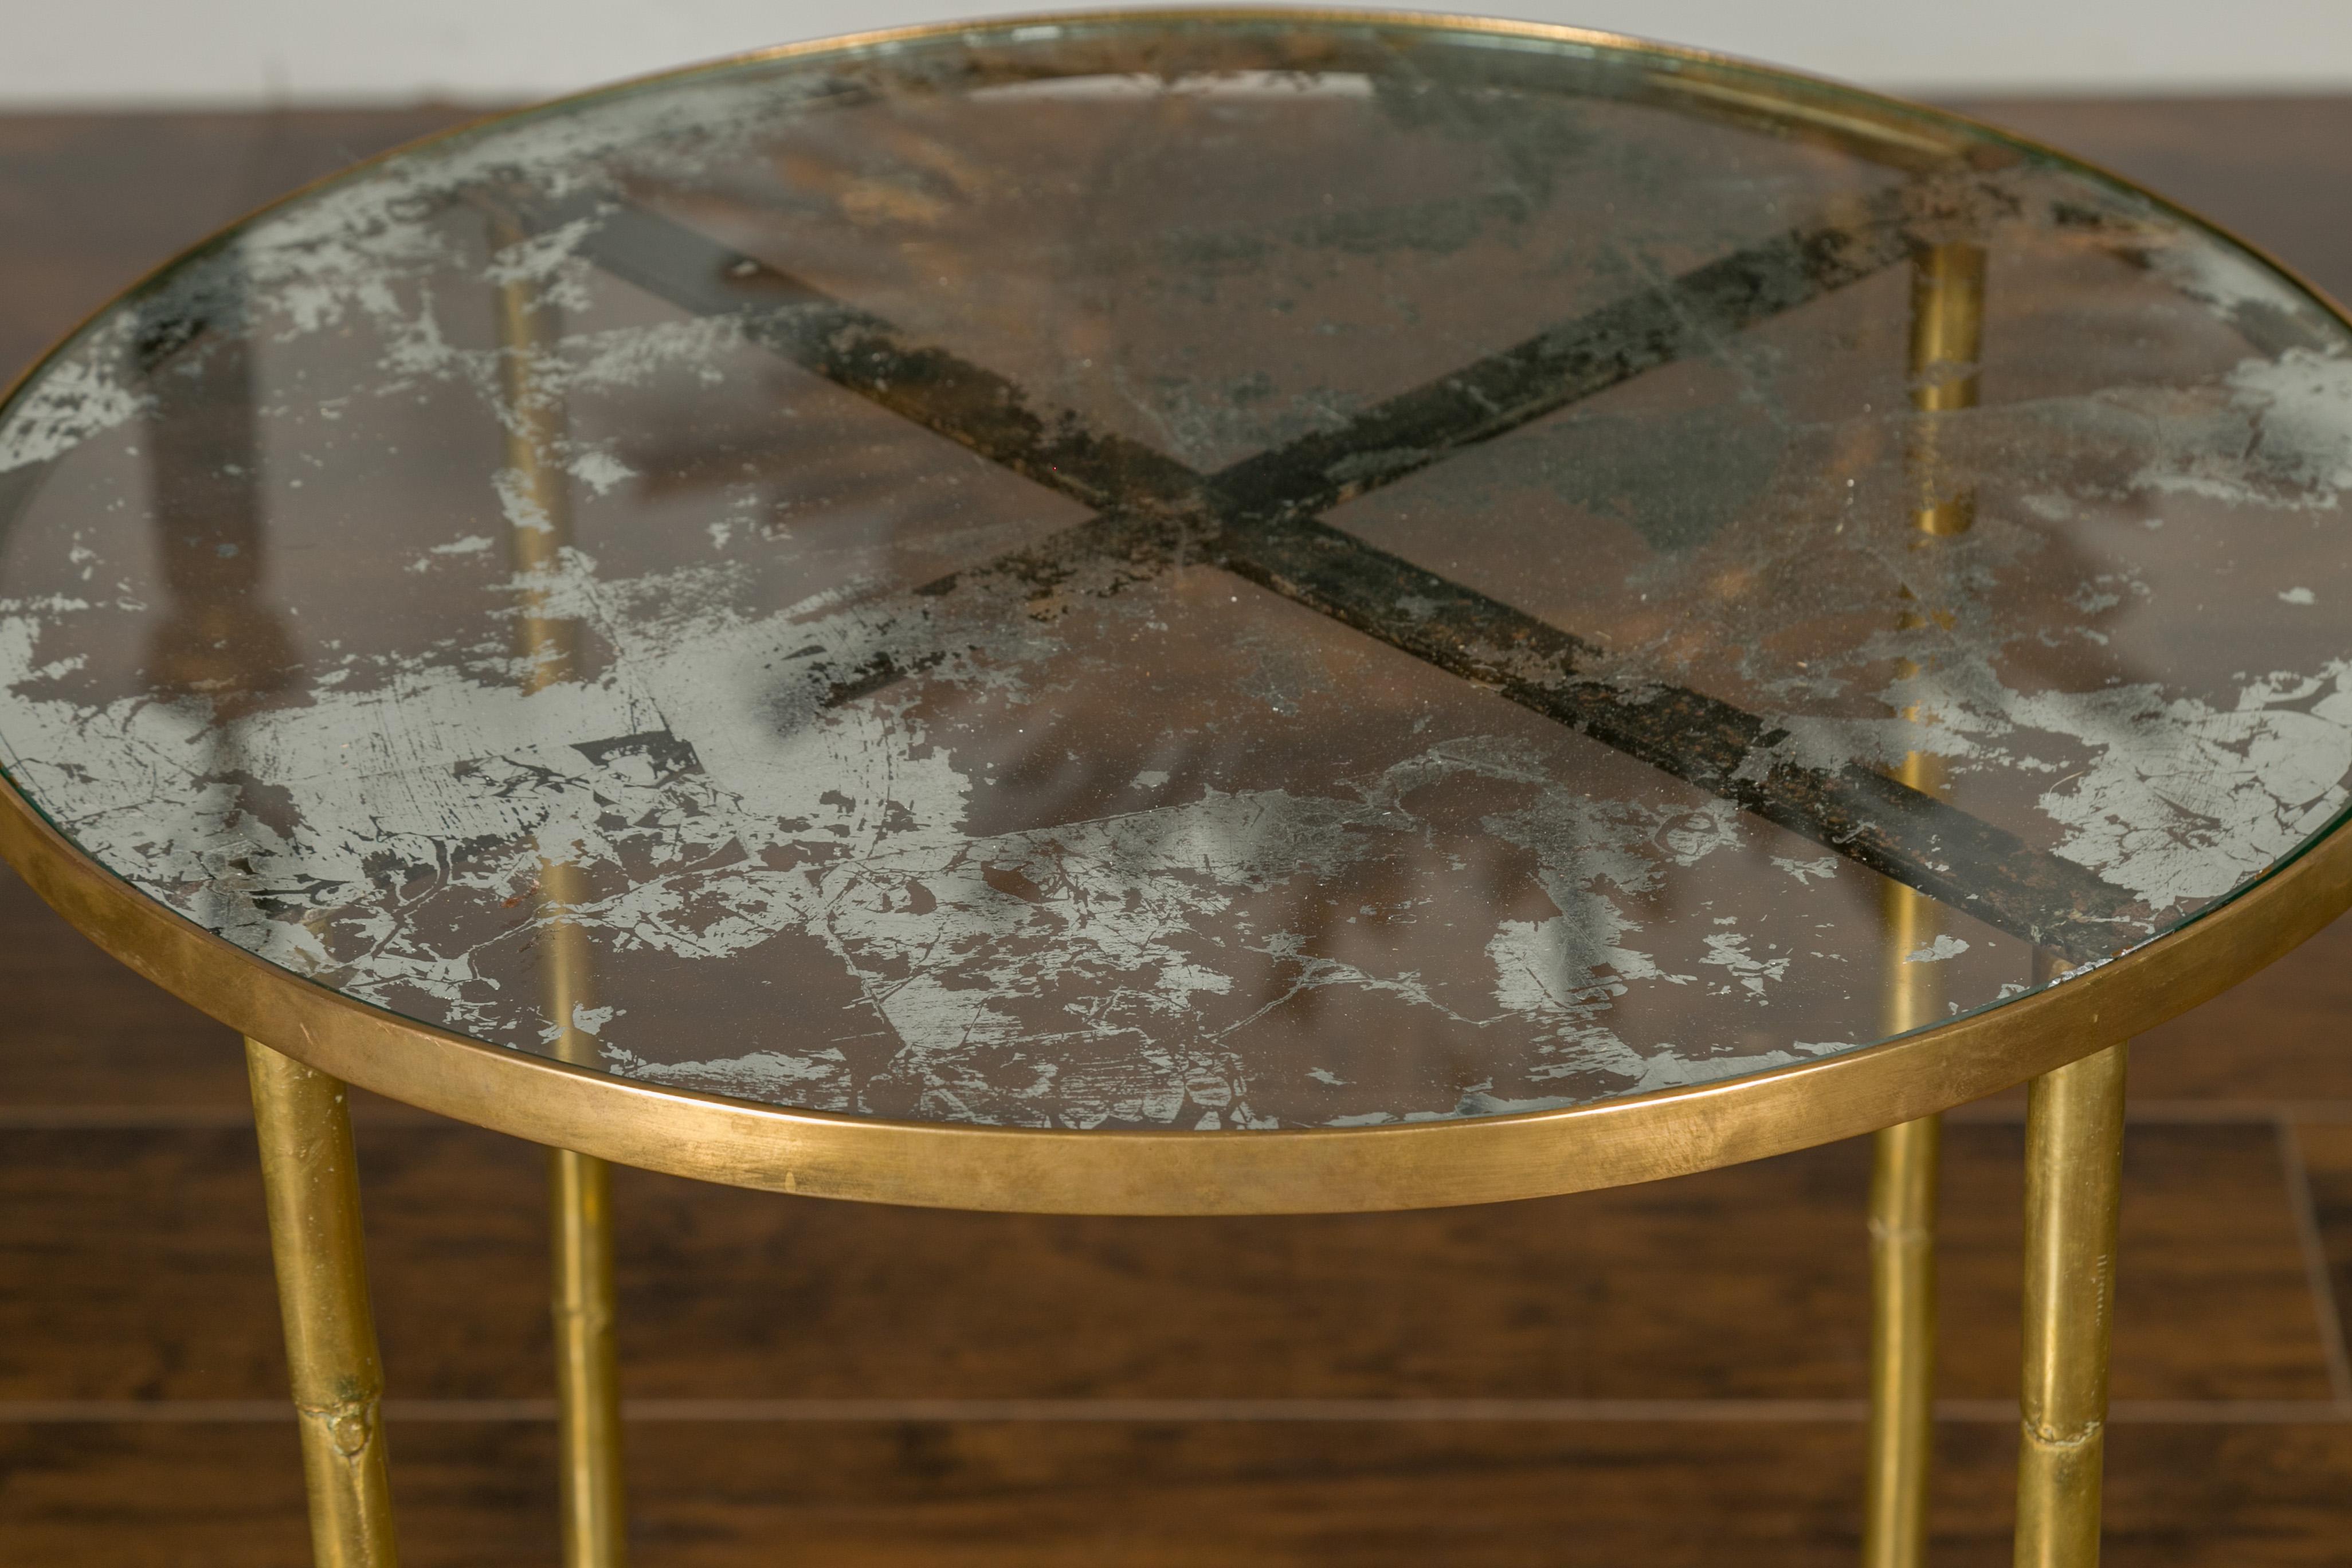 Italian Midcentury Brass Bamboo-Inspired Side Table with Distressed Glass Top In Good Condition For Sale In Atlanta, GA